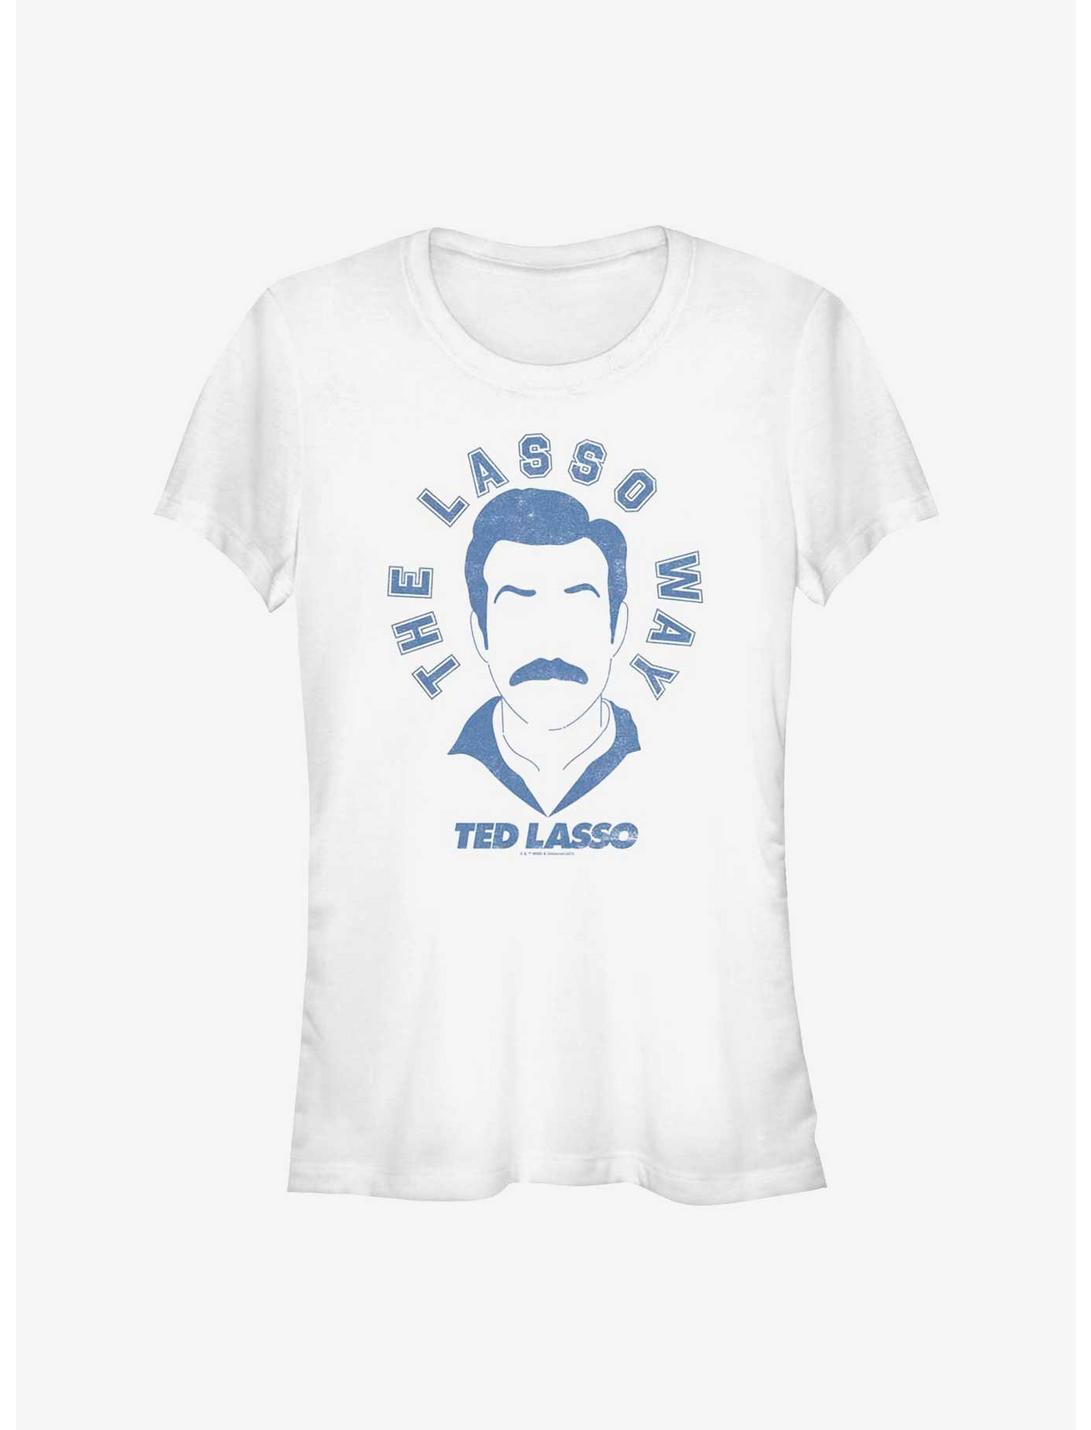 Ted Lasso The Lasso Way Girls T-Shirt, WHITE, hi-res